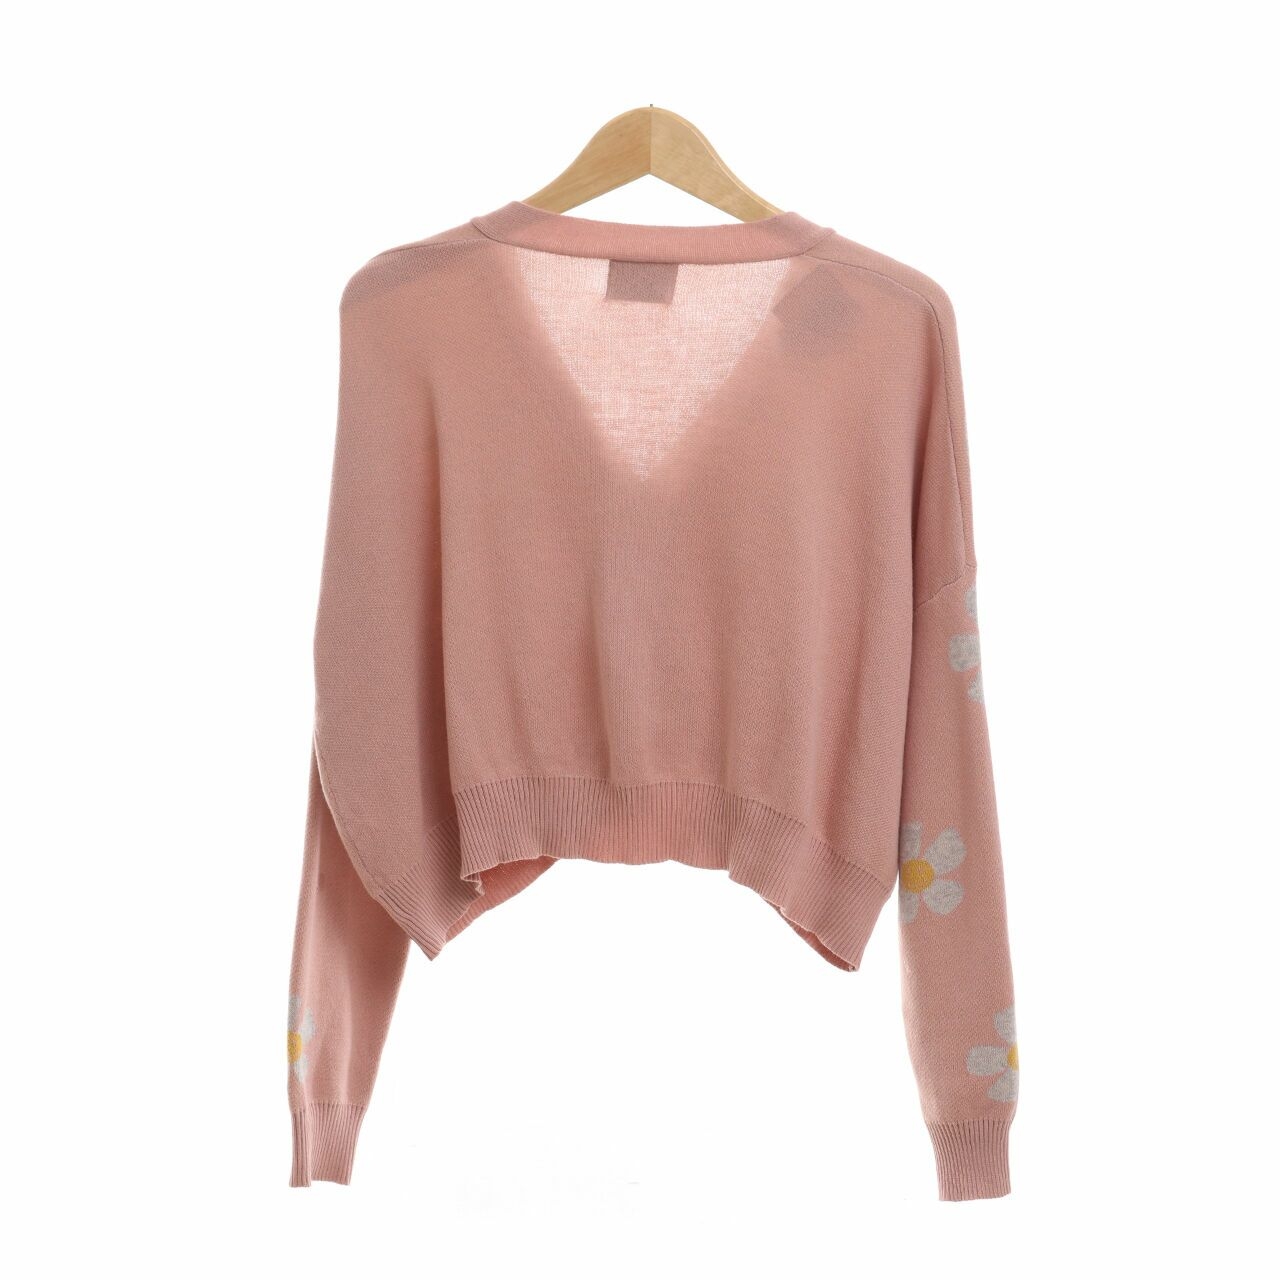 IKYK for Someday Dusty Pink Knit Floral Cardigan